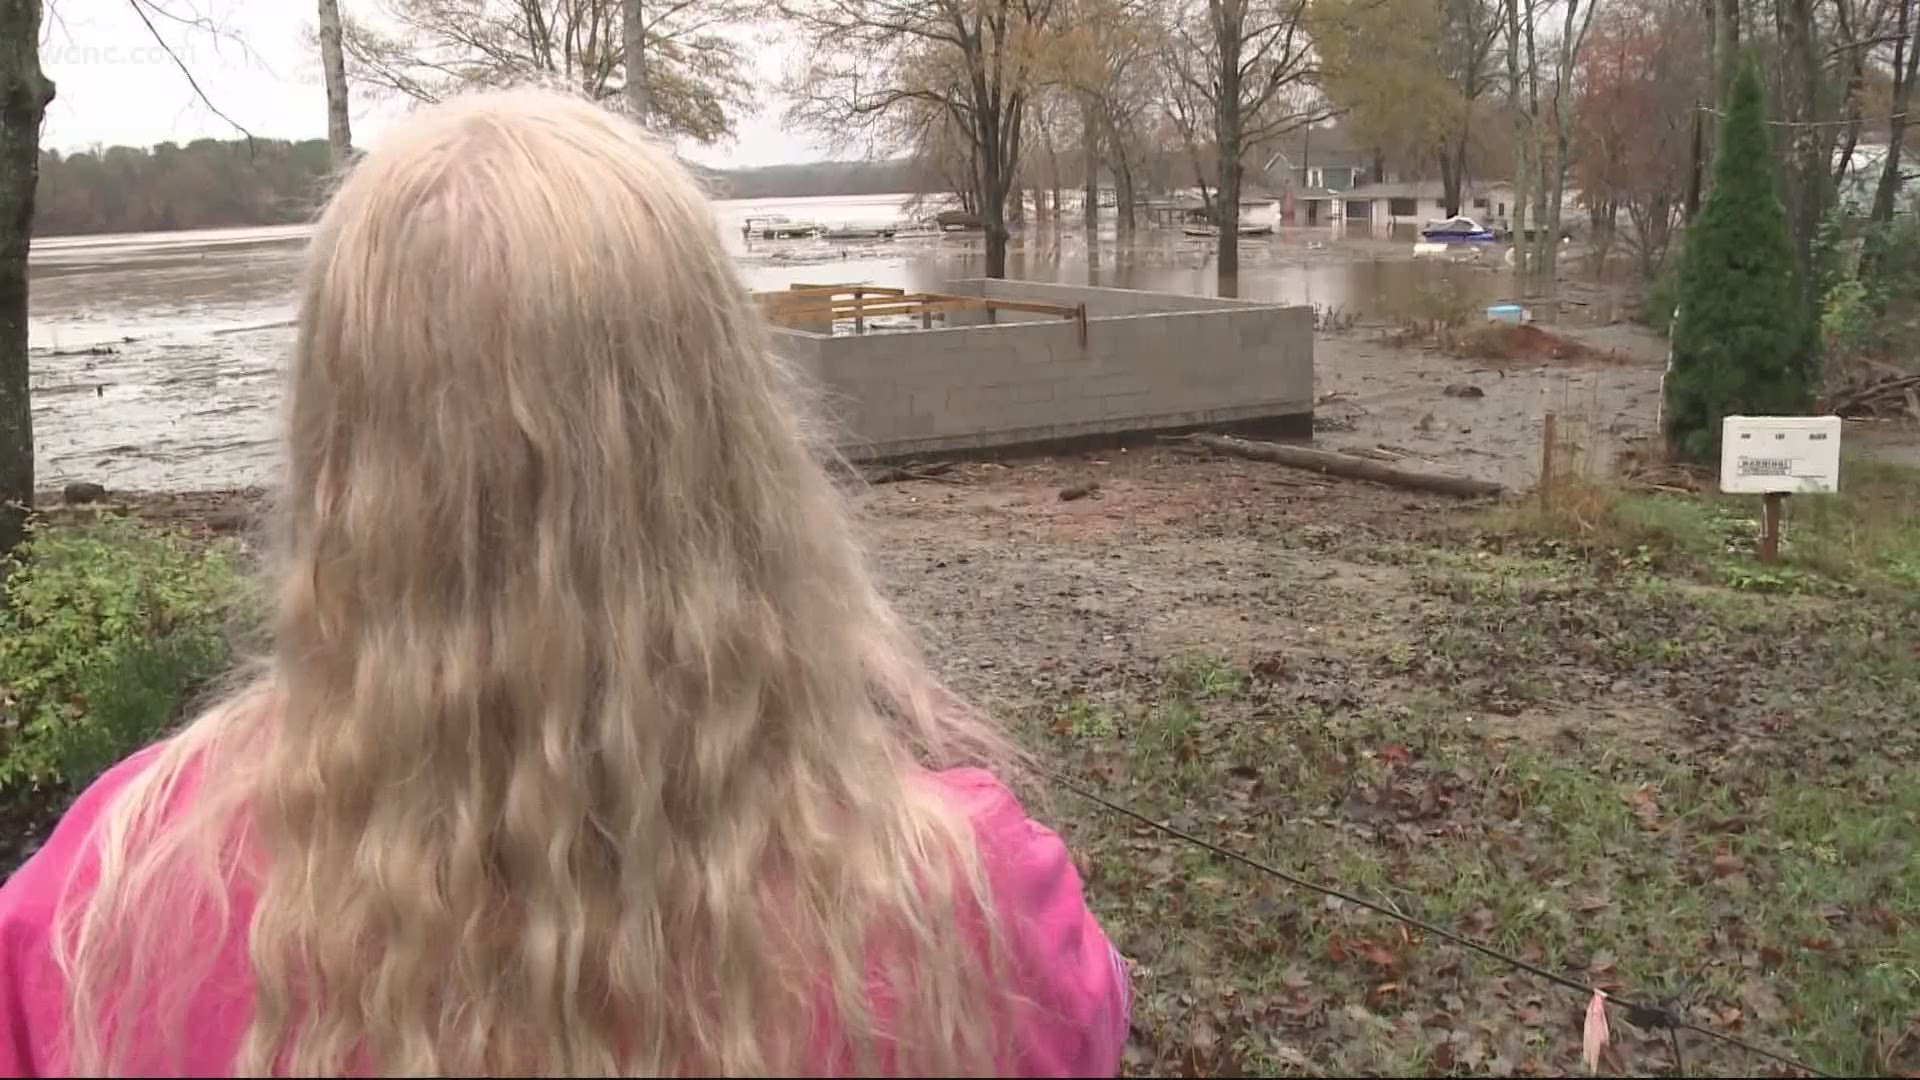 Homes and roads were left completely under water after record breaking rain totals.